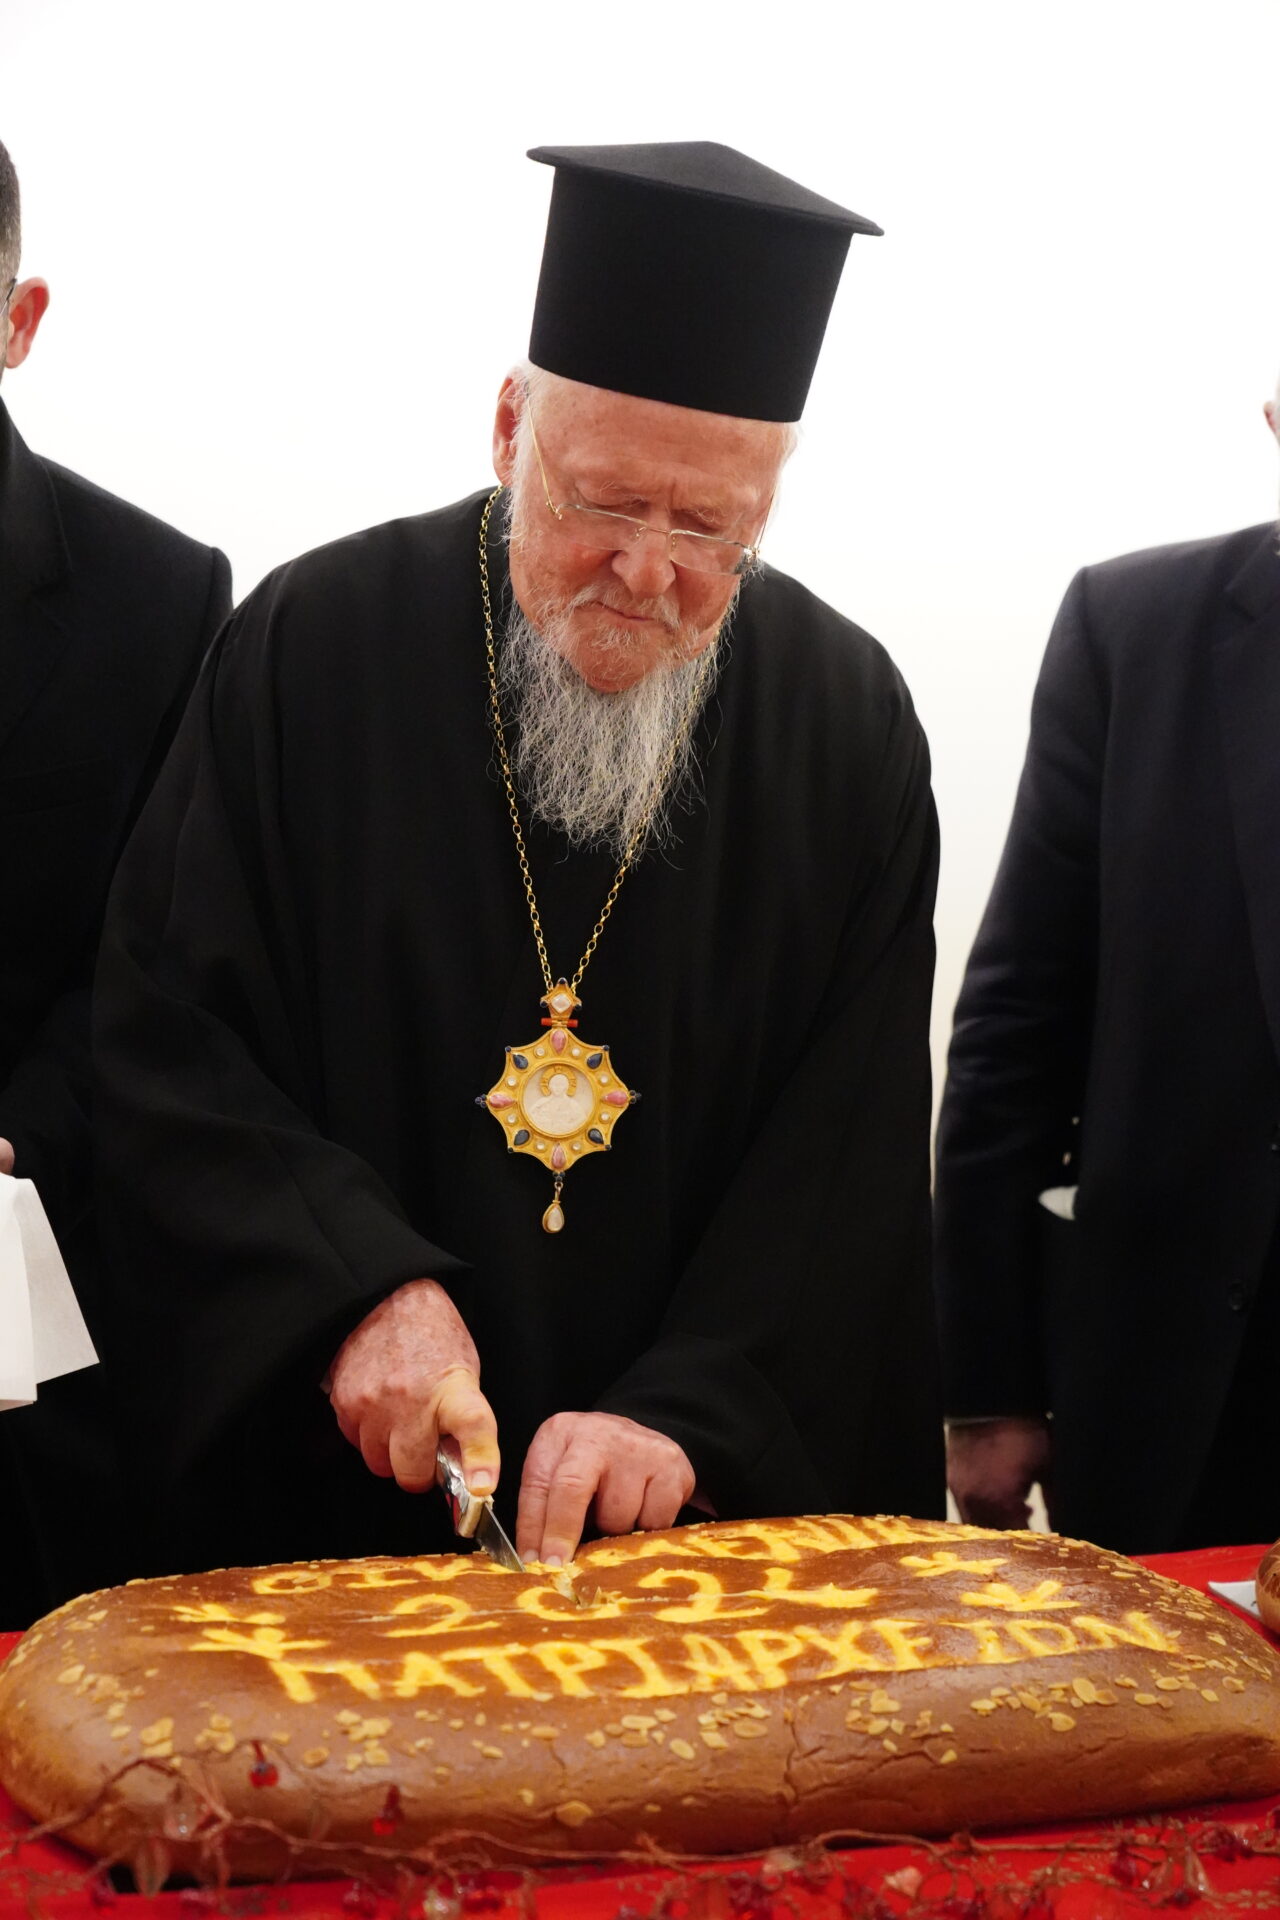 Ecumenical Patriarch Bartholomew: “We dedicate ourselves to the pursuit of peace and reconciliation”